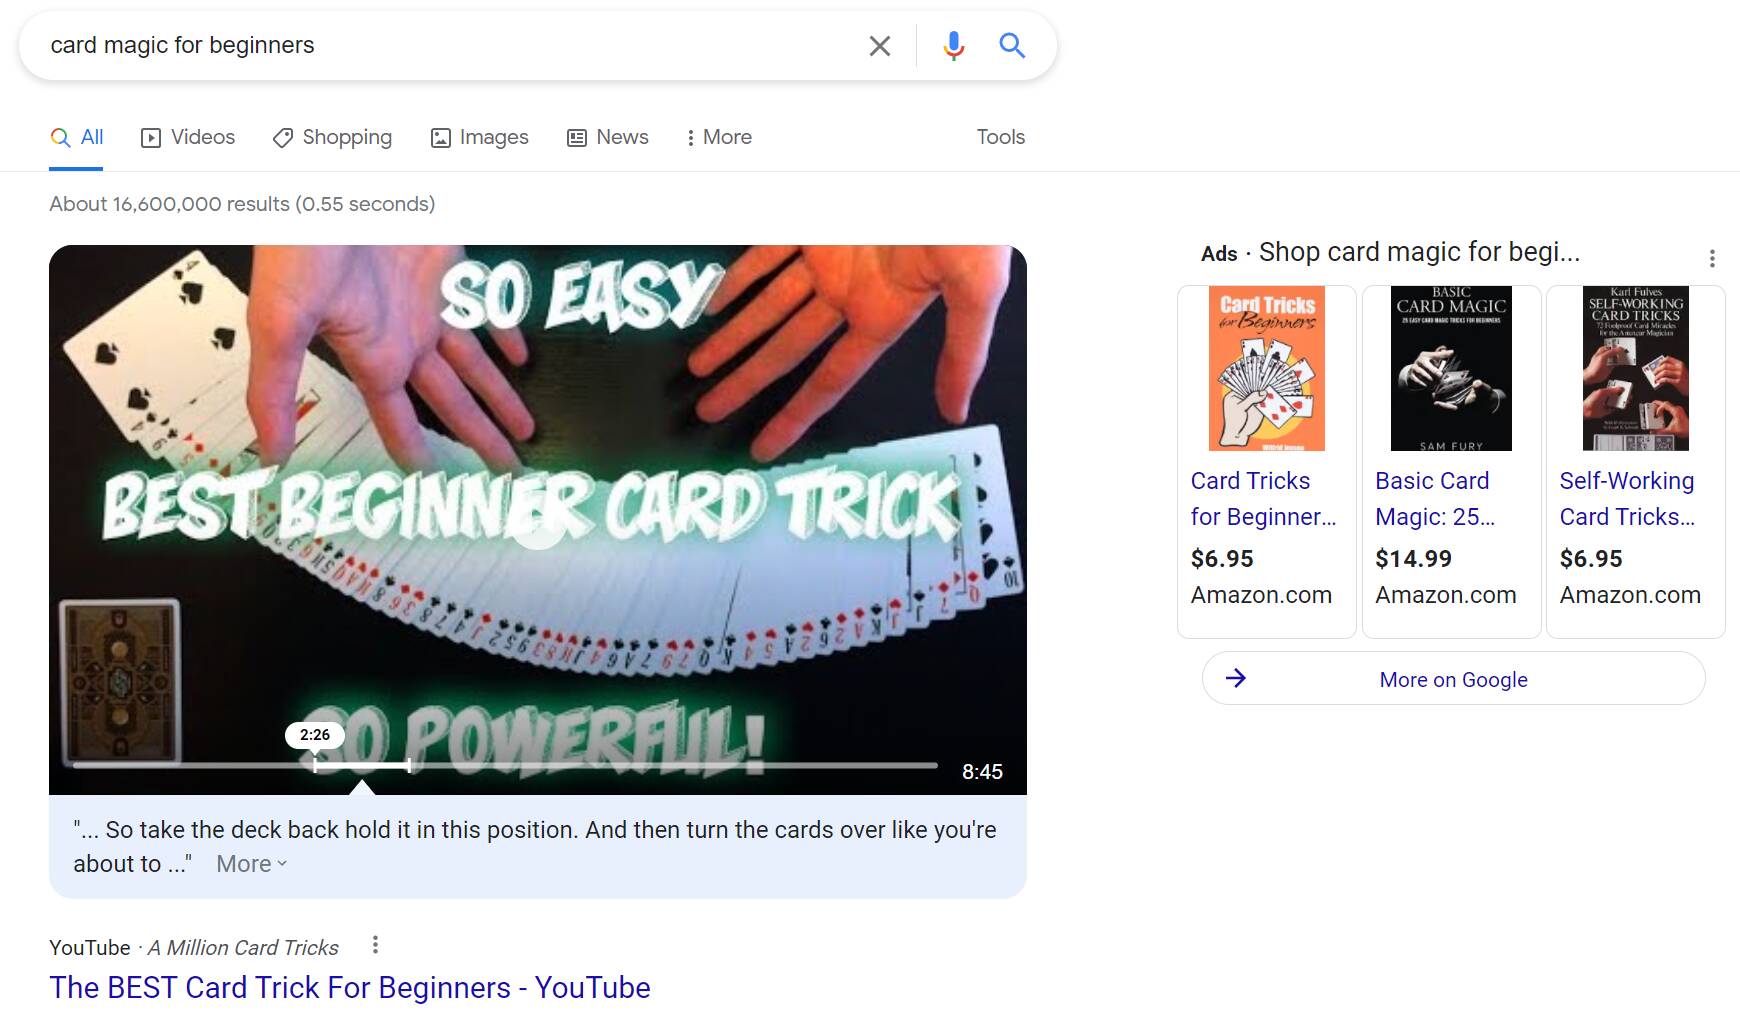 Google search results for "card magic for beginners"